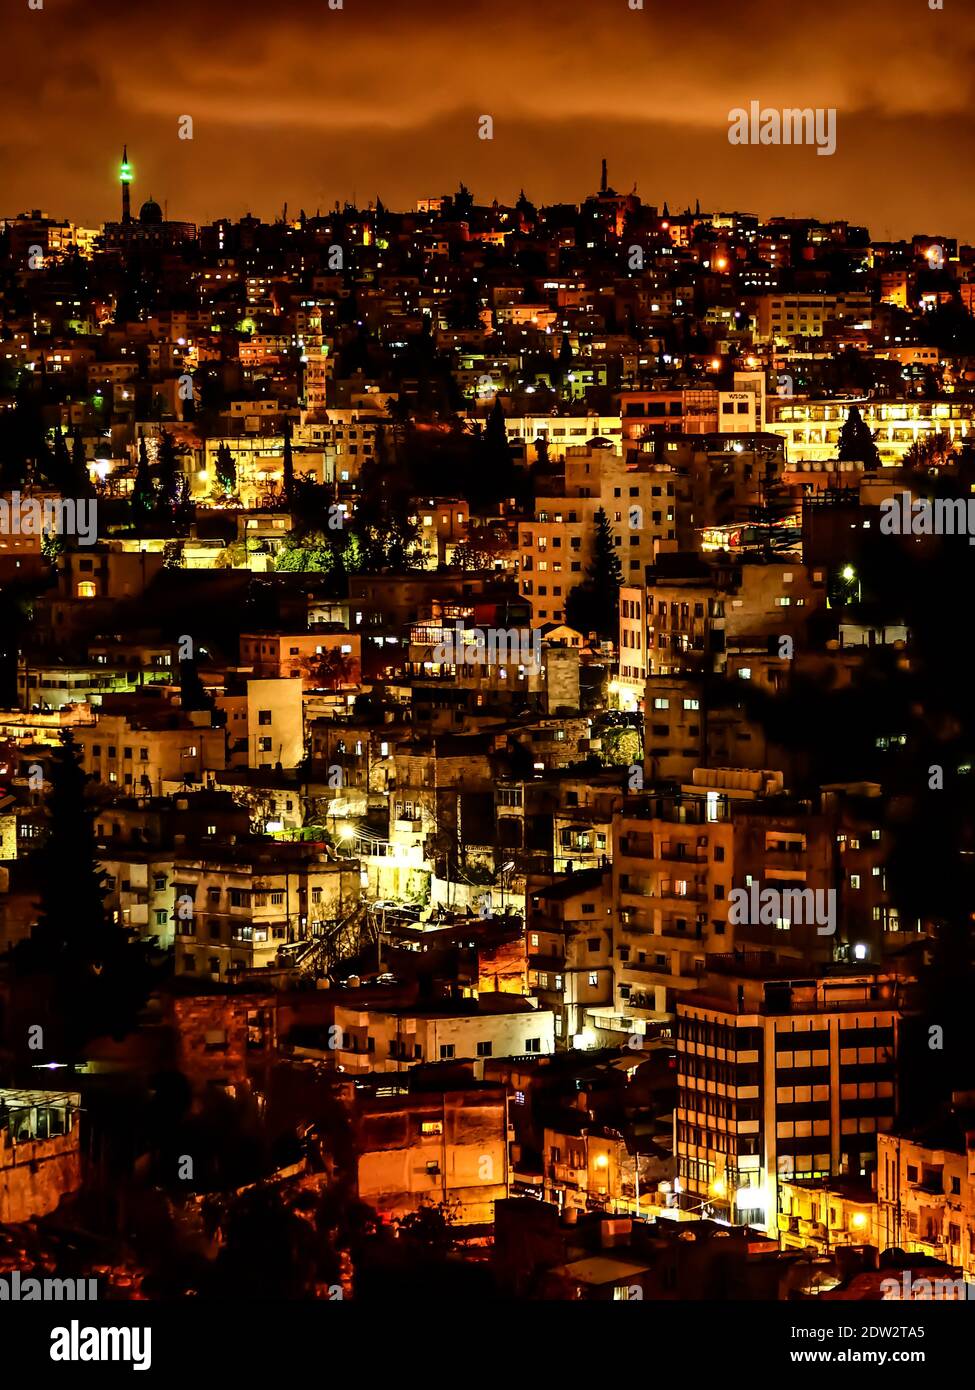 Jordan Nightlife High Resolution Photography and Images - Alamy